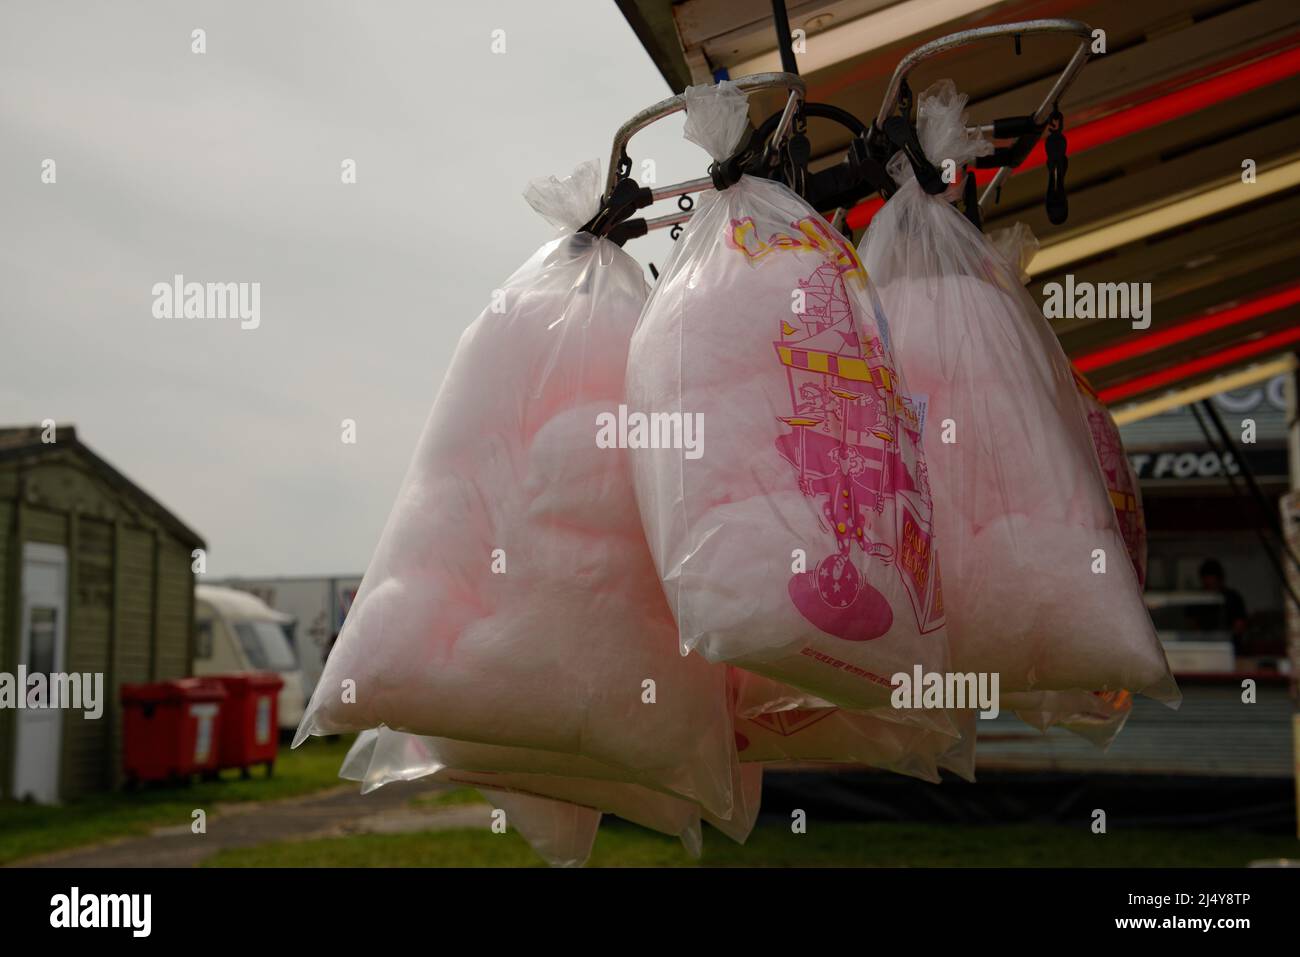 Candy floss for sale in a plastic bag. Stock Photo